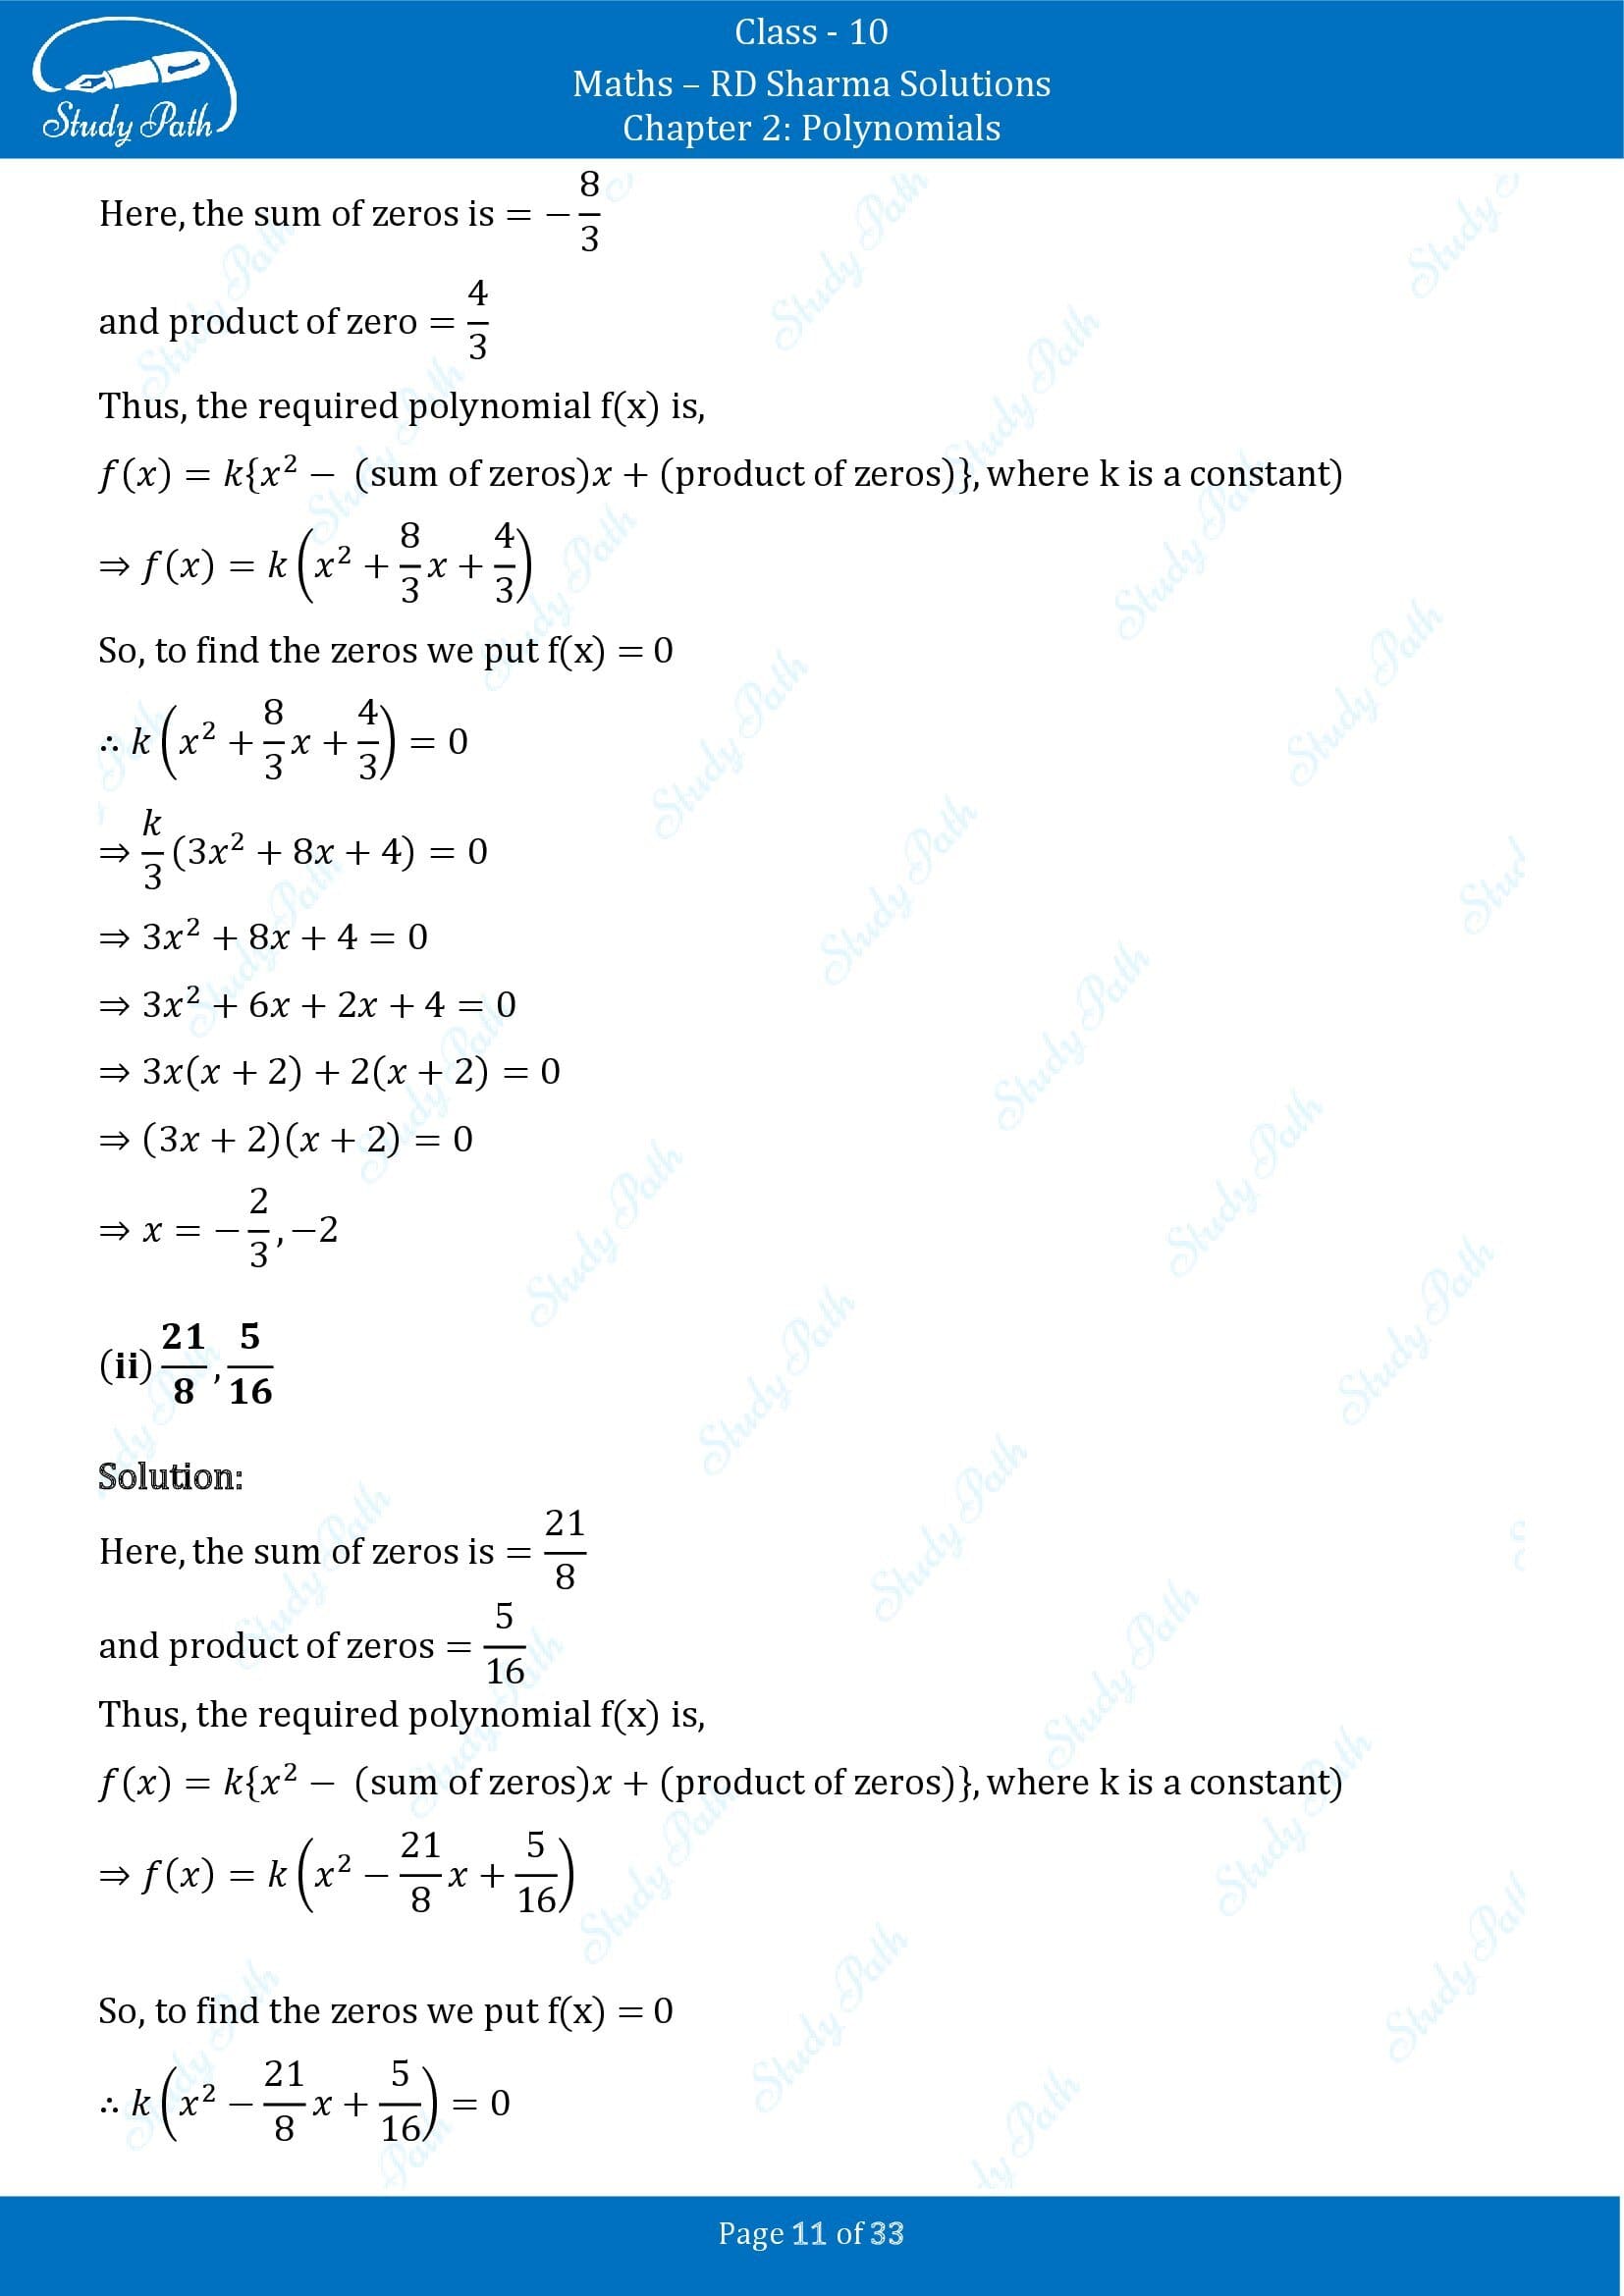 RD Sharma Solutions Class 10 Chapter 2 Polynomials Exercise 2.1 00011